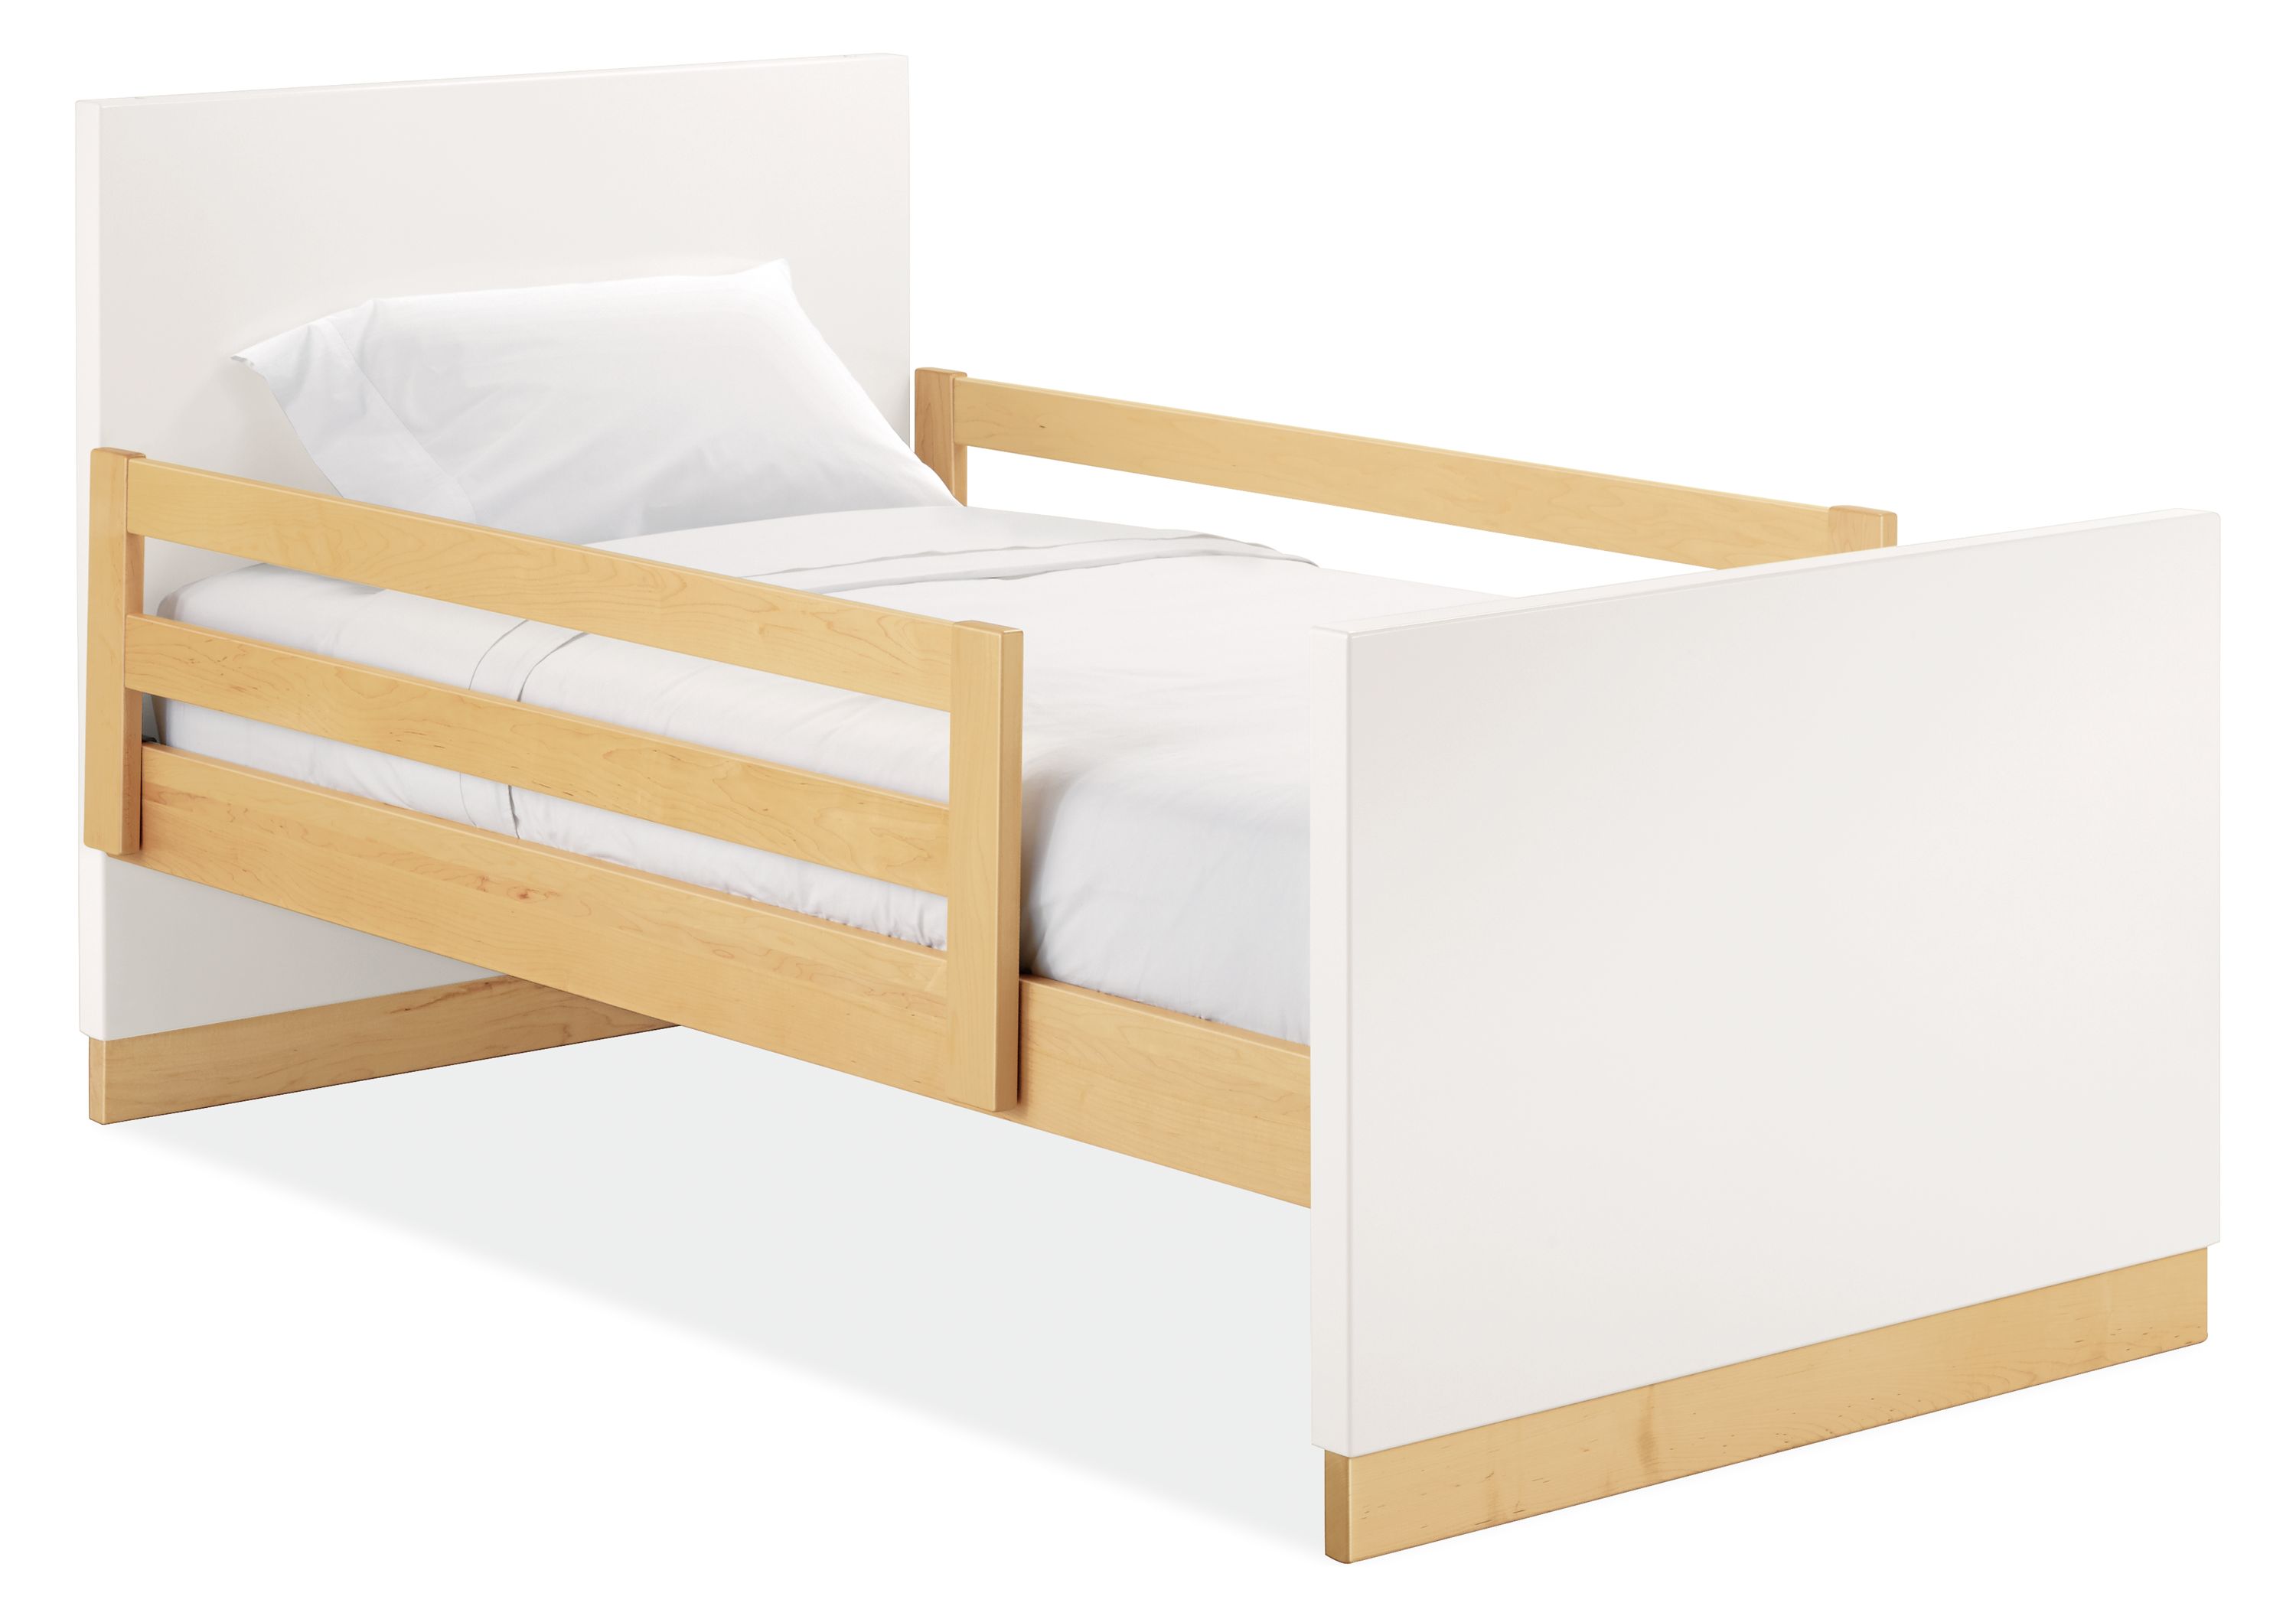 Moda Bed Guardrails Modern Kids, Twin Size Bed With Guard Rails